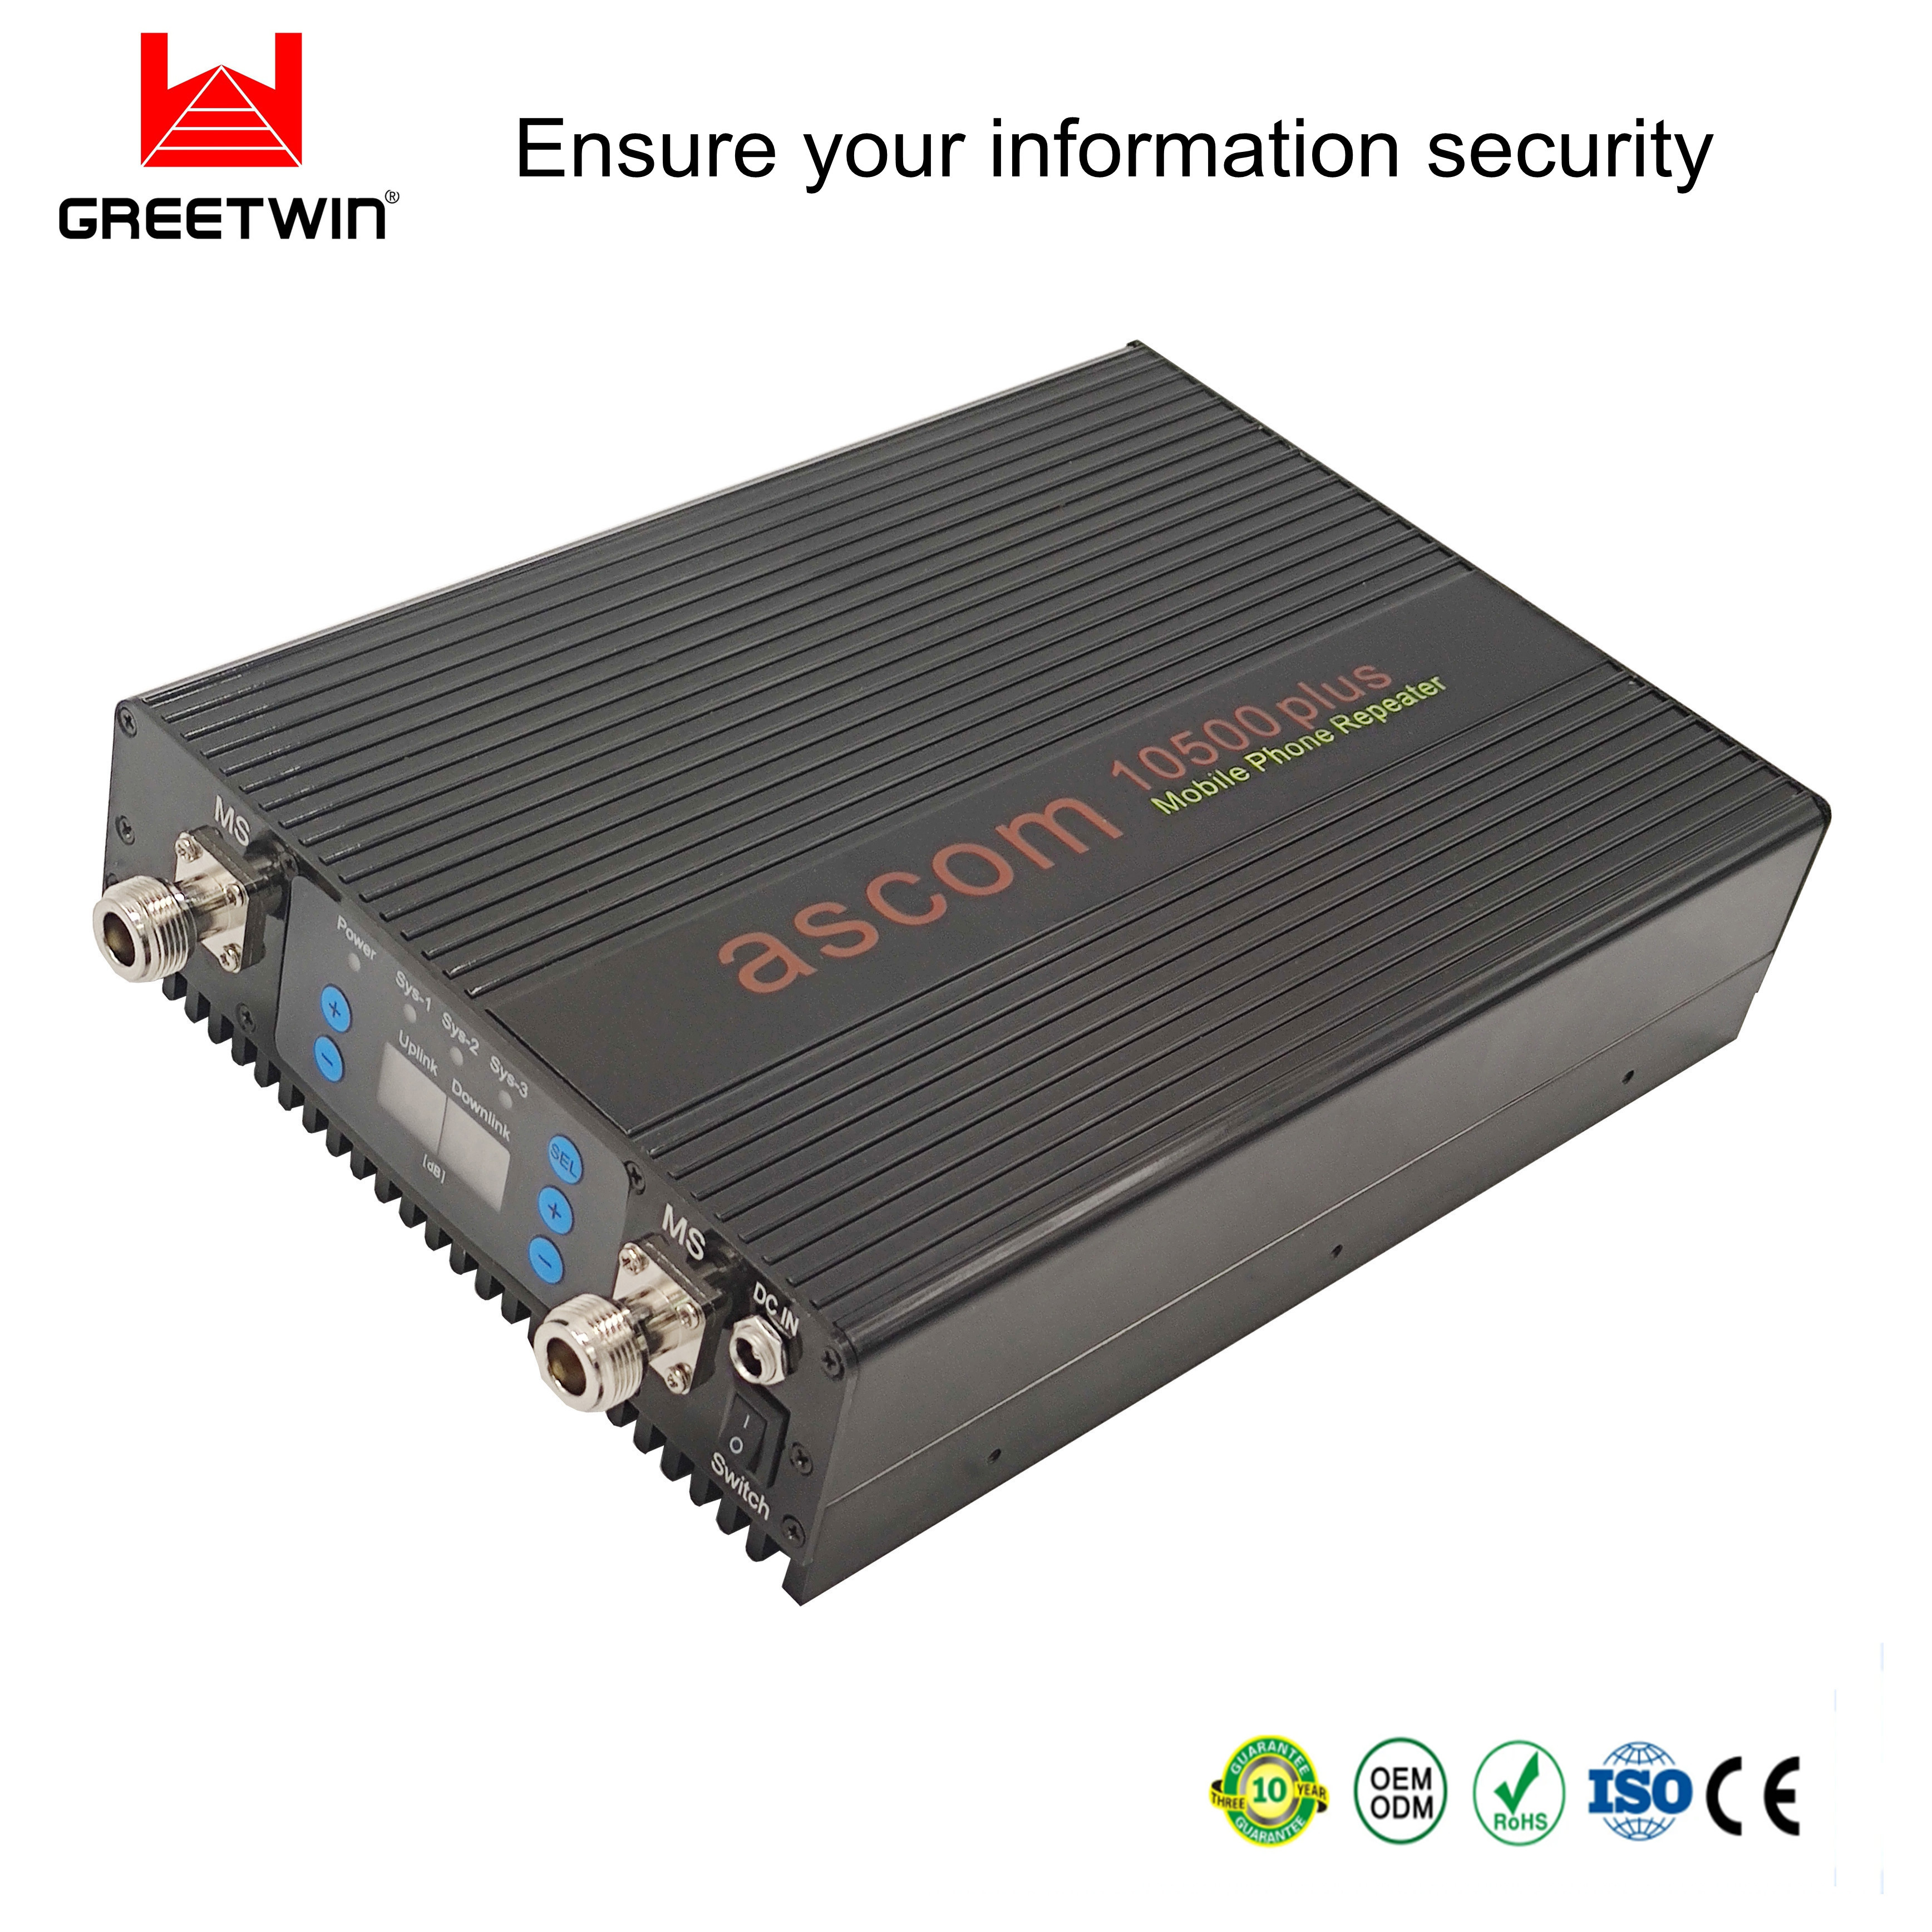 Signal Band 915MHz 30dbm 850GSM Cell Phone Repeater